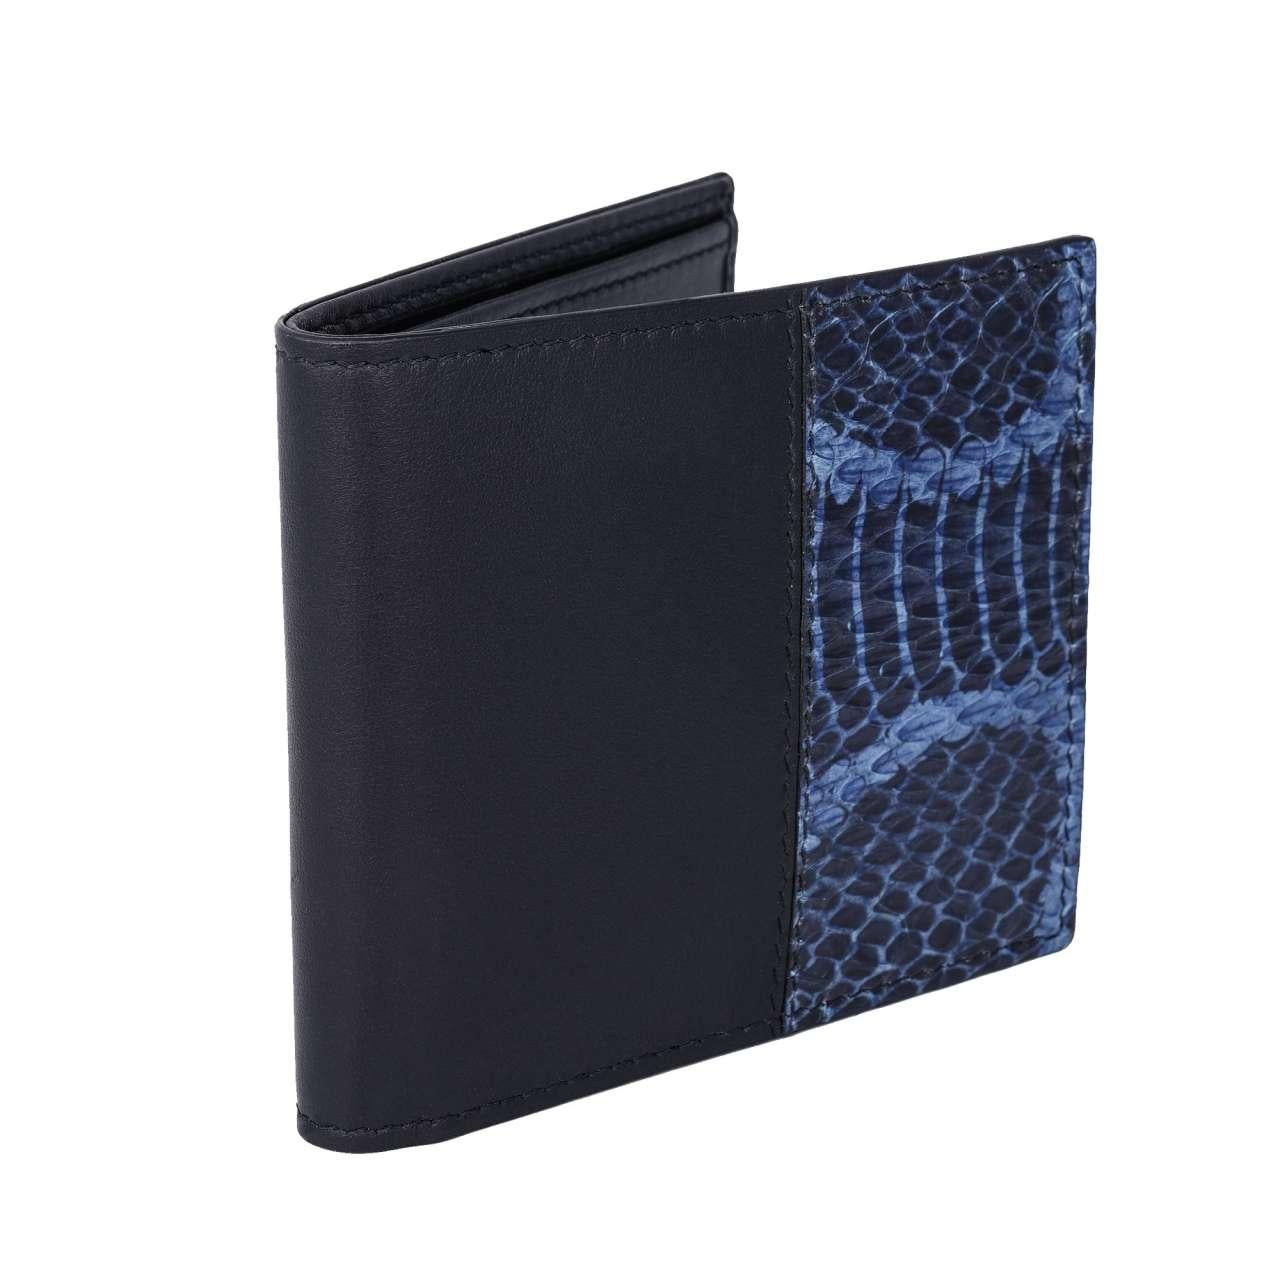 - Snake skin and calf leather wallet with golden logo in black and blue by DOLCE & GABBANA - New with Tag - Former RRP: EUR 275 - MADE IN ITALY - Model: BP1321-AN372-89954 - Material: 70% Calfskin, 30% Snakeskin - DG logo in gold on the back - 1